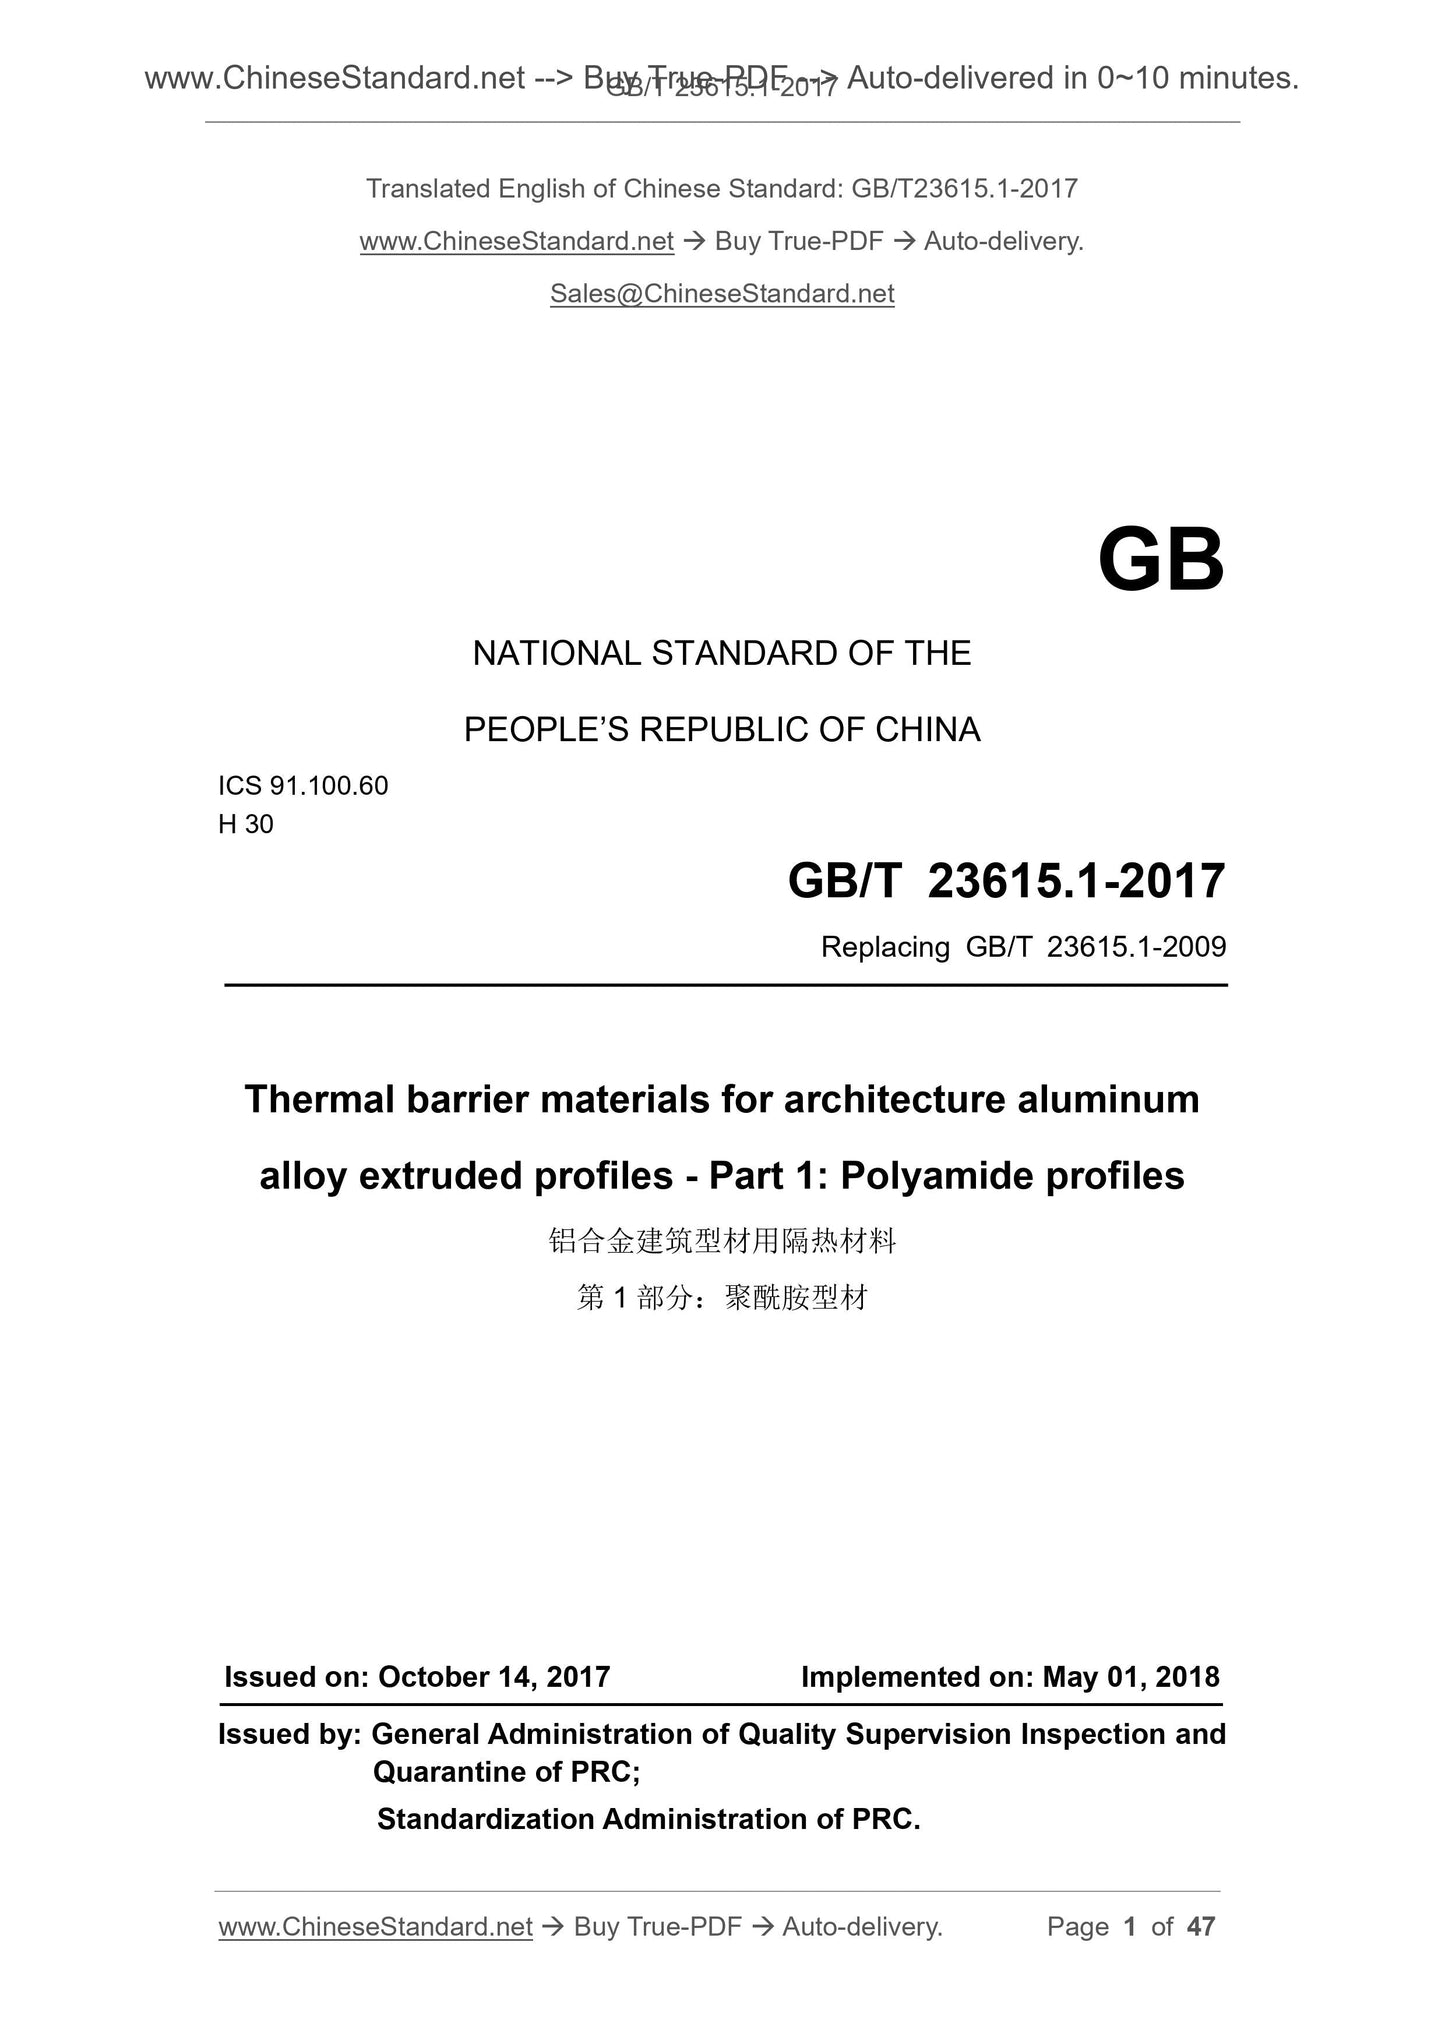 GB/T 23615.1-2017 Page 1